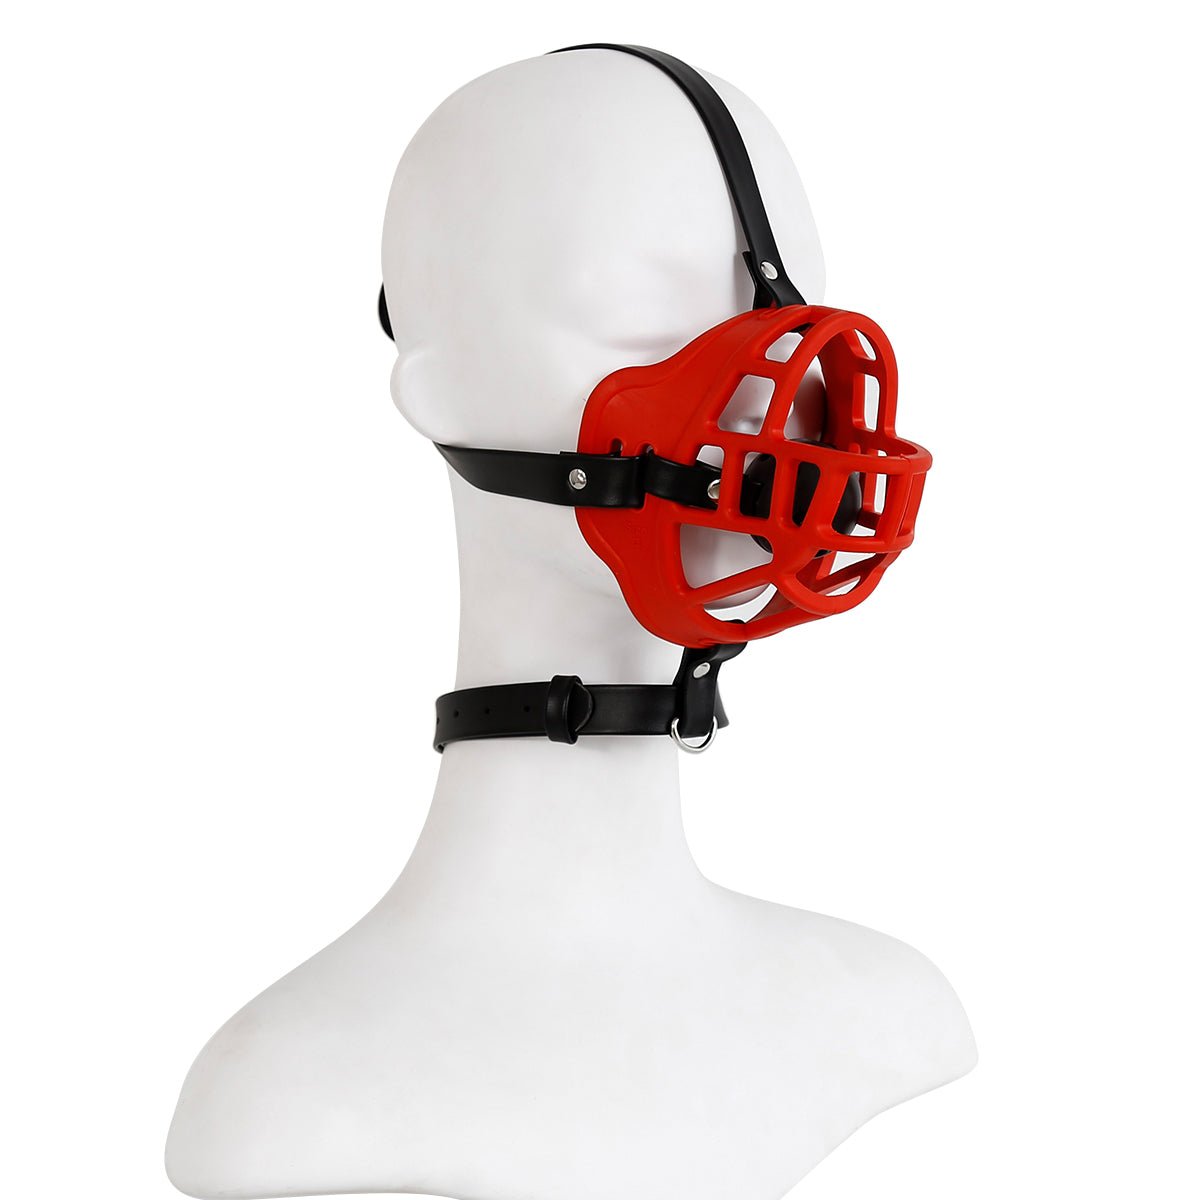 BDSM dog Muzzle harness with ball gag - Oxy-shop